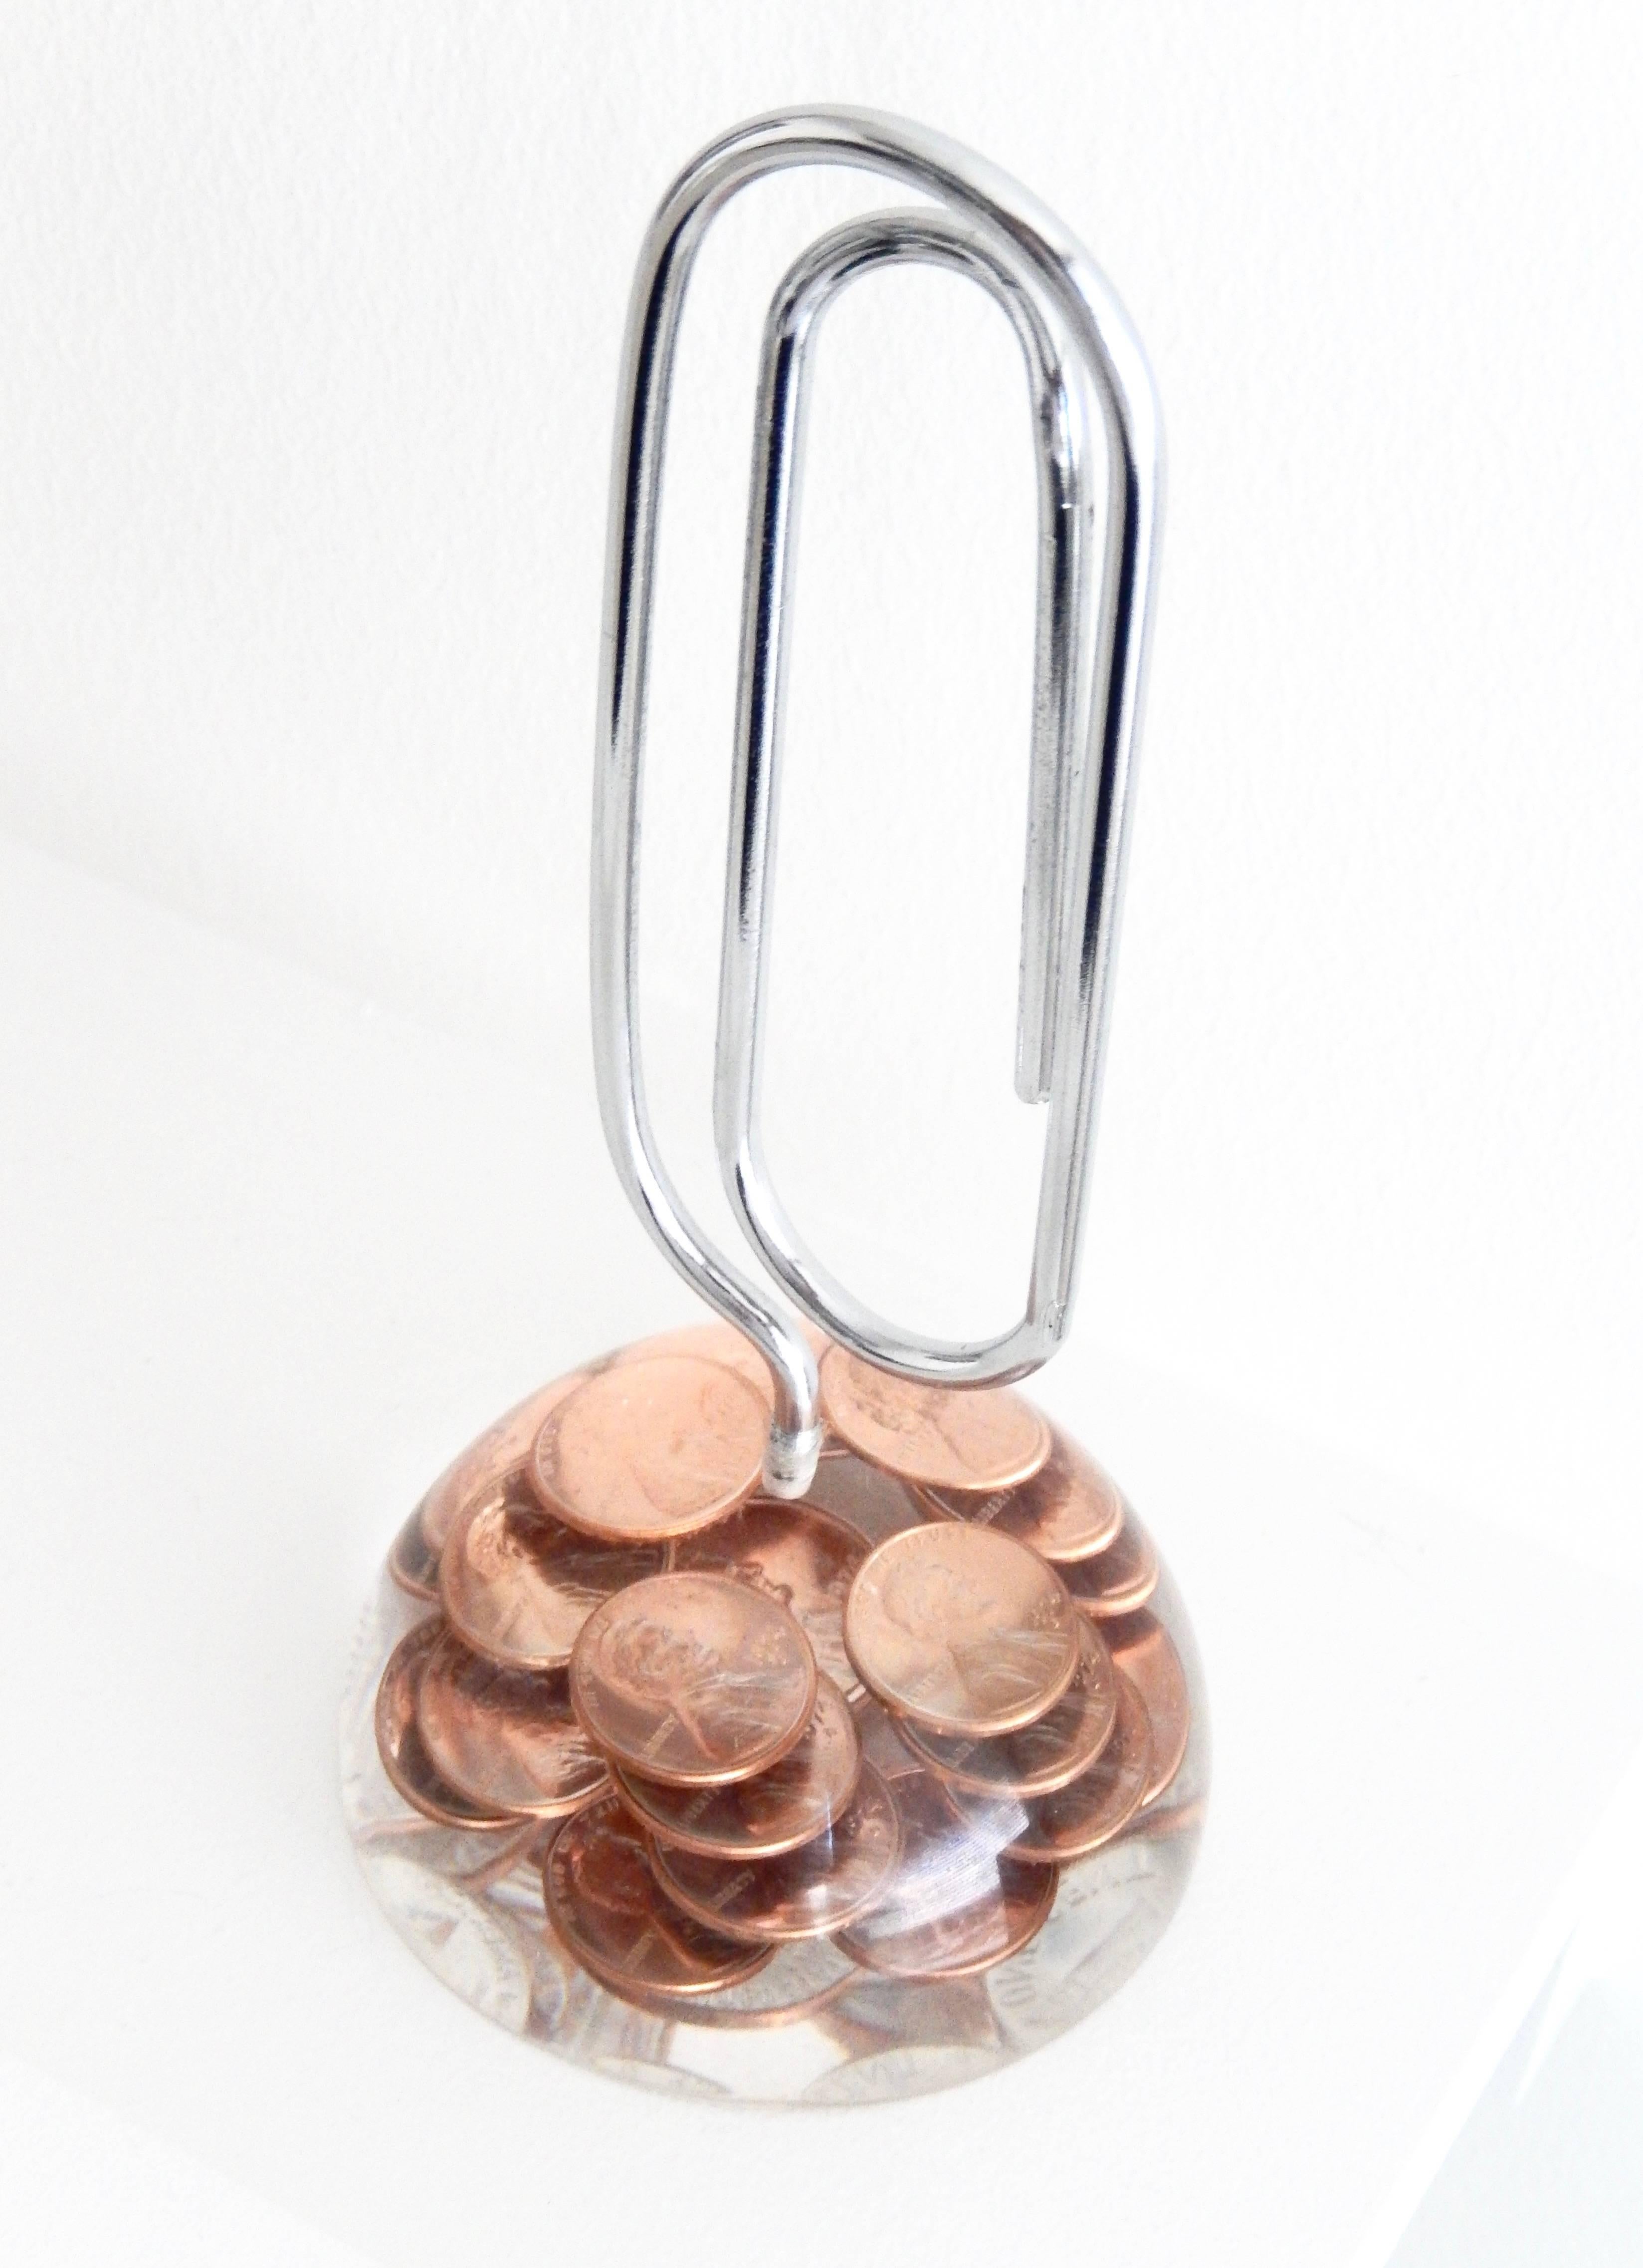 Modern 1974 Large Chrome Paper Clip with Pennies/Lucite Base For Sale